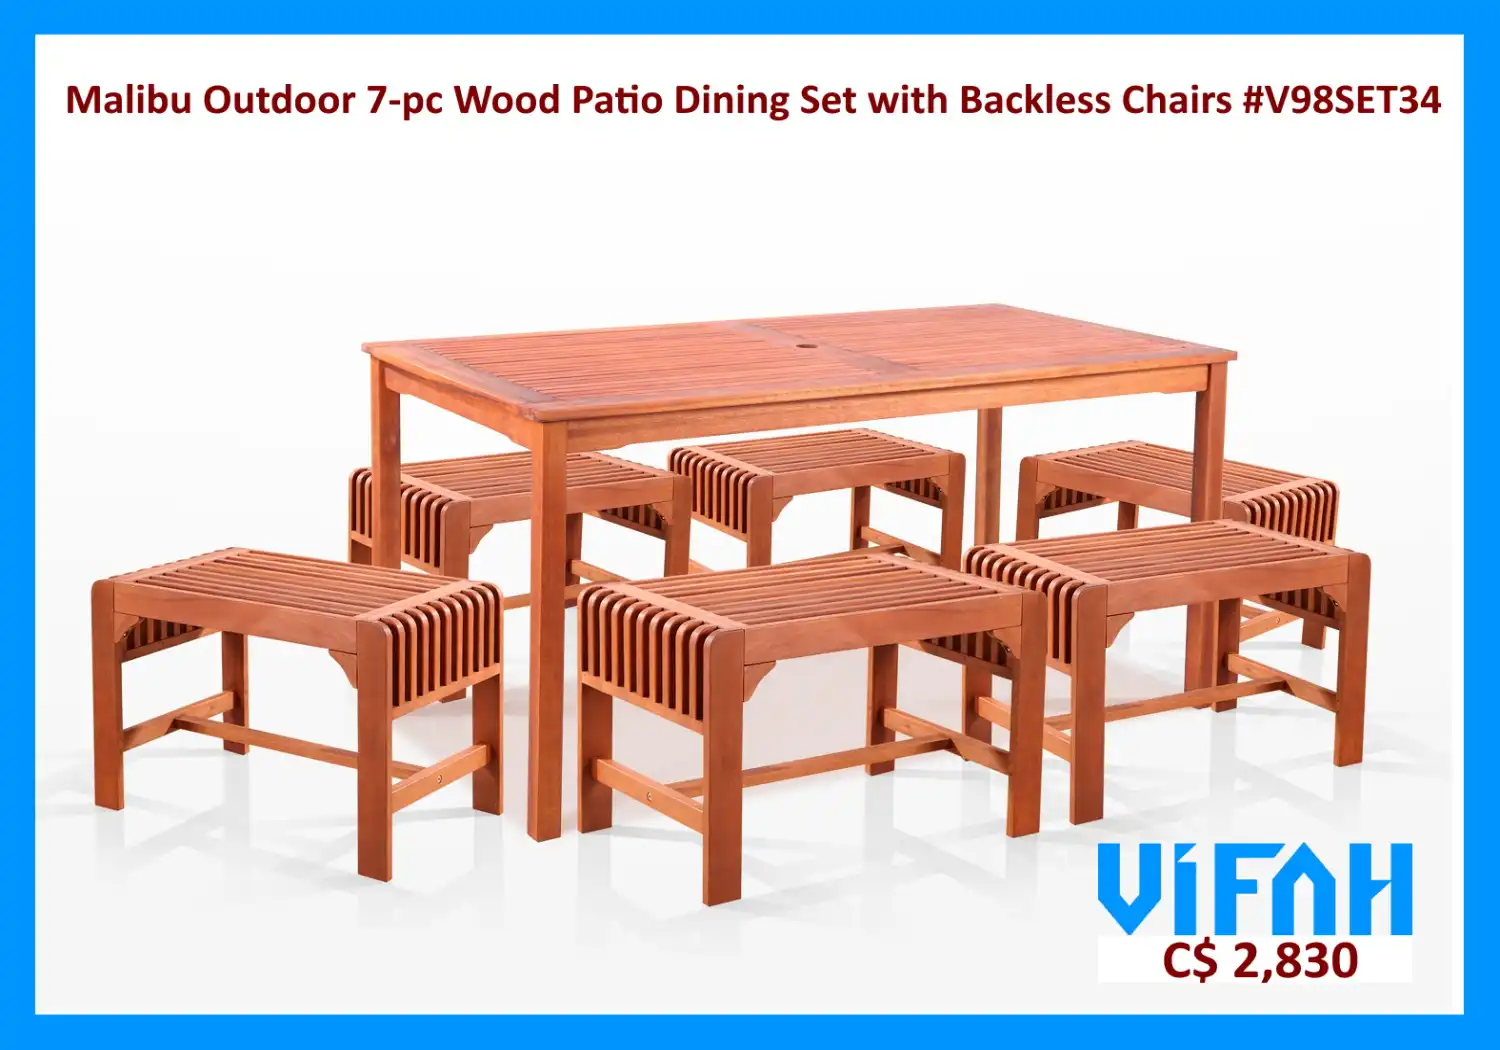 MALIBU Outdoor #V98SET34 7-piece Wood Patio Dining Set with Backless Chairs